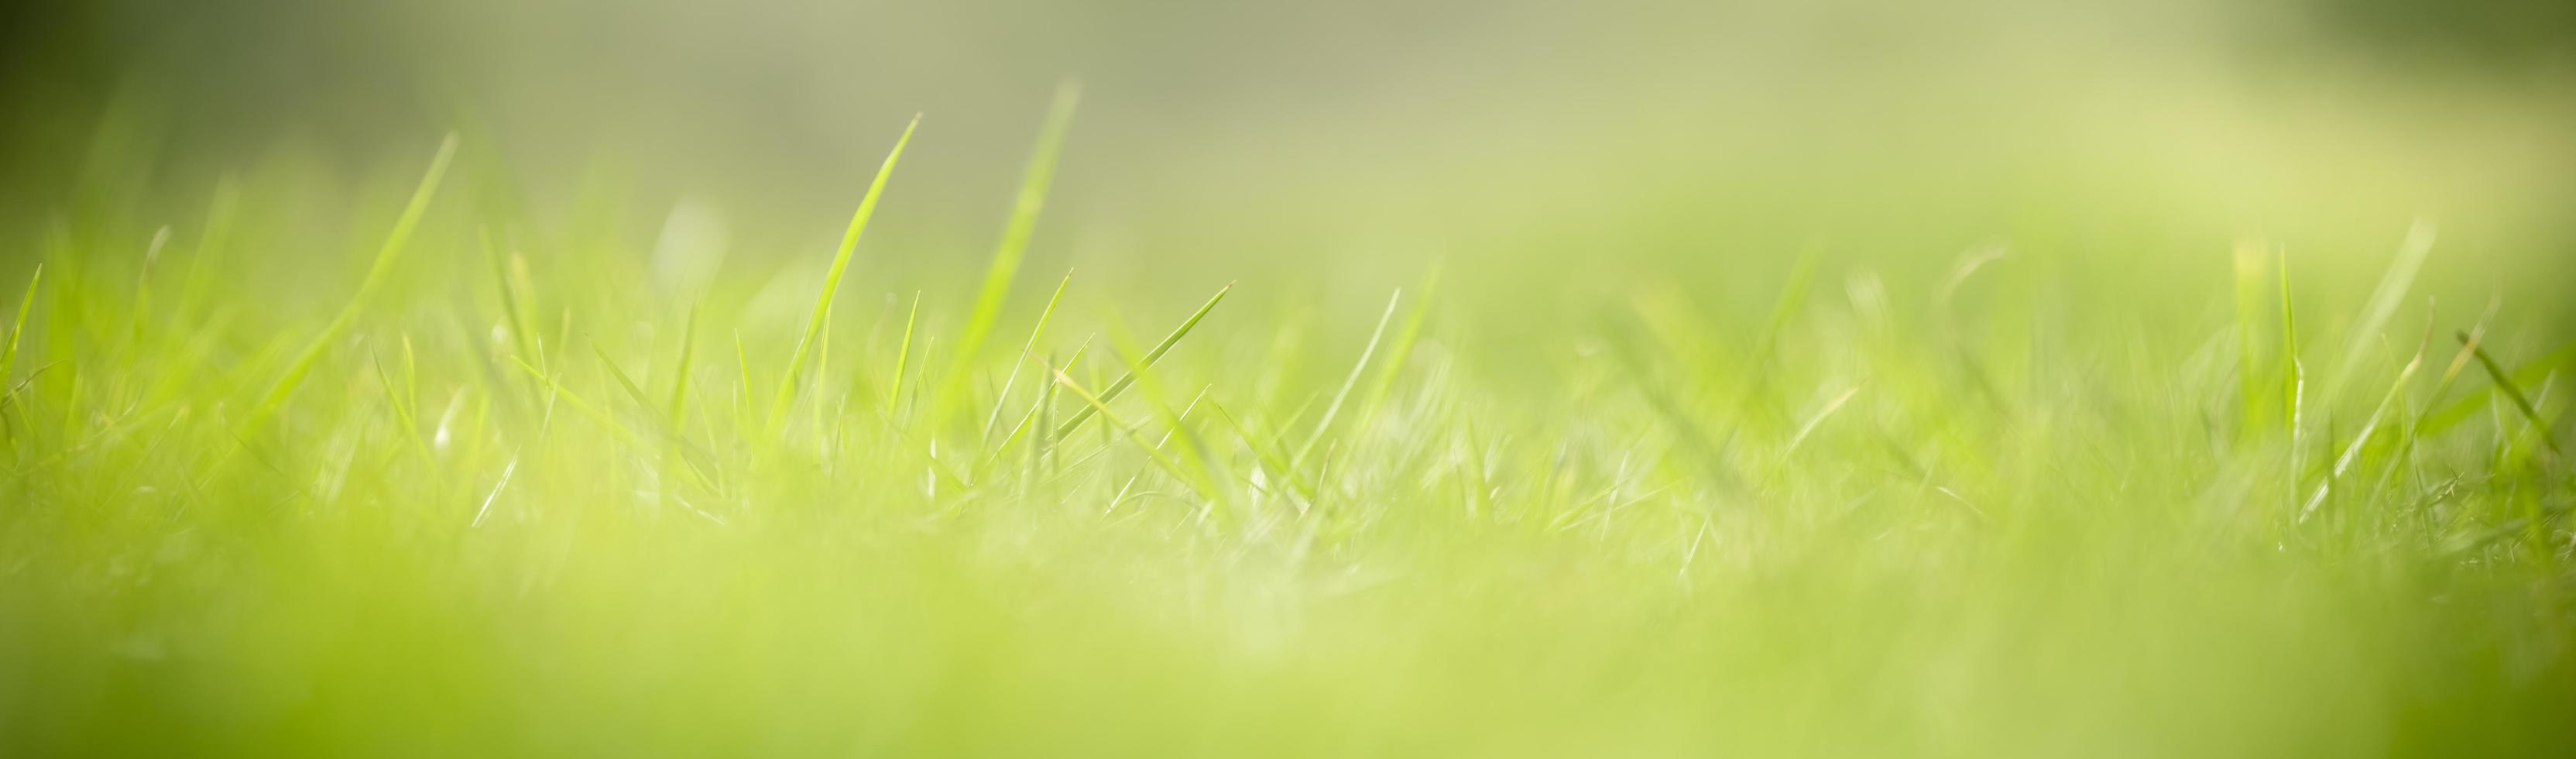 Close up of nature view green grass leaf on blurred greenery background under sunlight with bokeh and copy space using as background natural plants landscape, ecology cover concept. photo